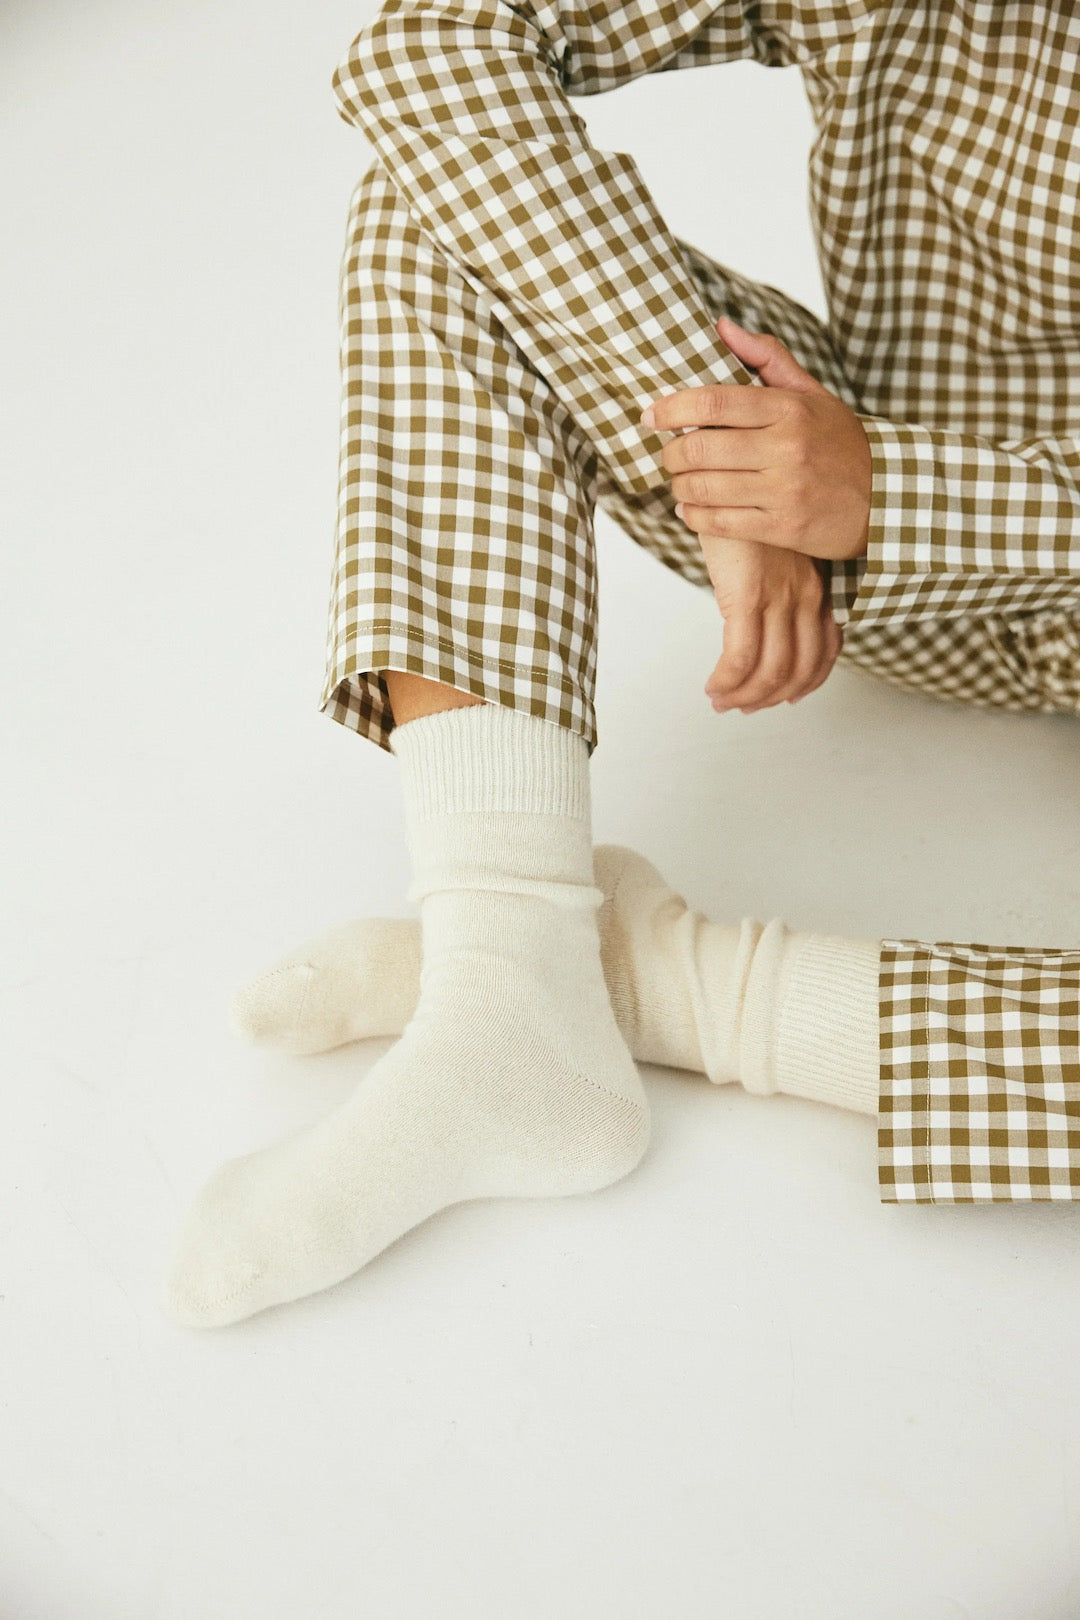 A woman wearing the Classic Set - Olive Gingham by general sleep, including a plaid shirt and socks.